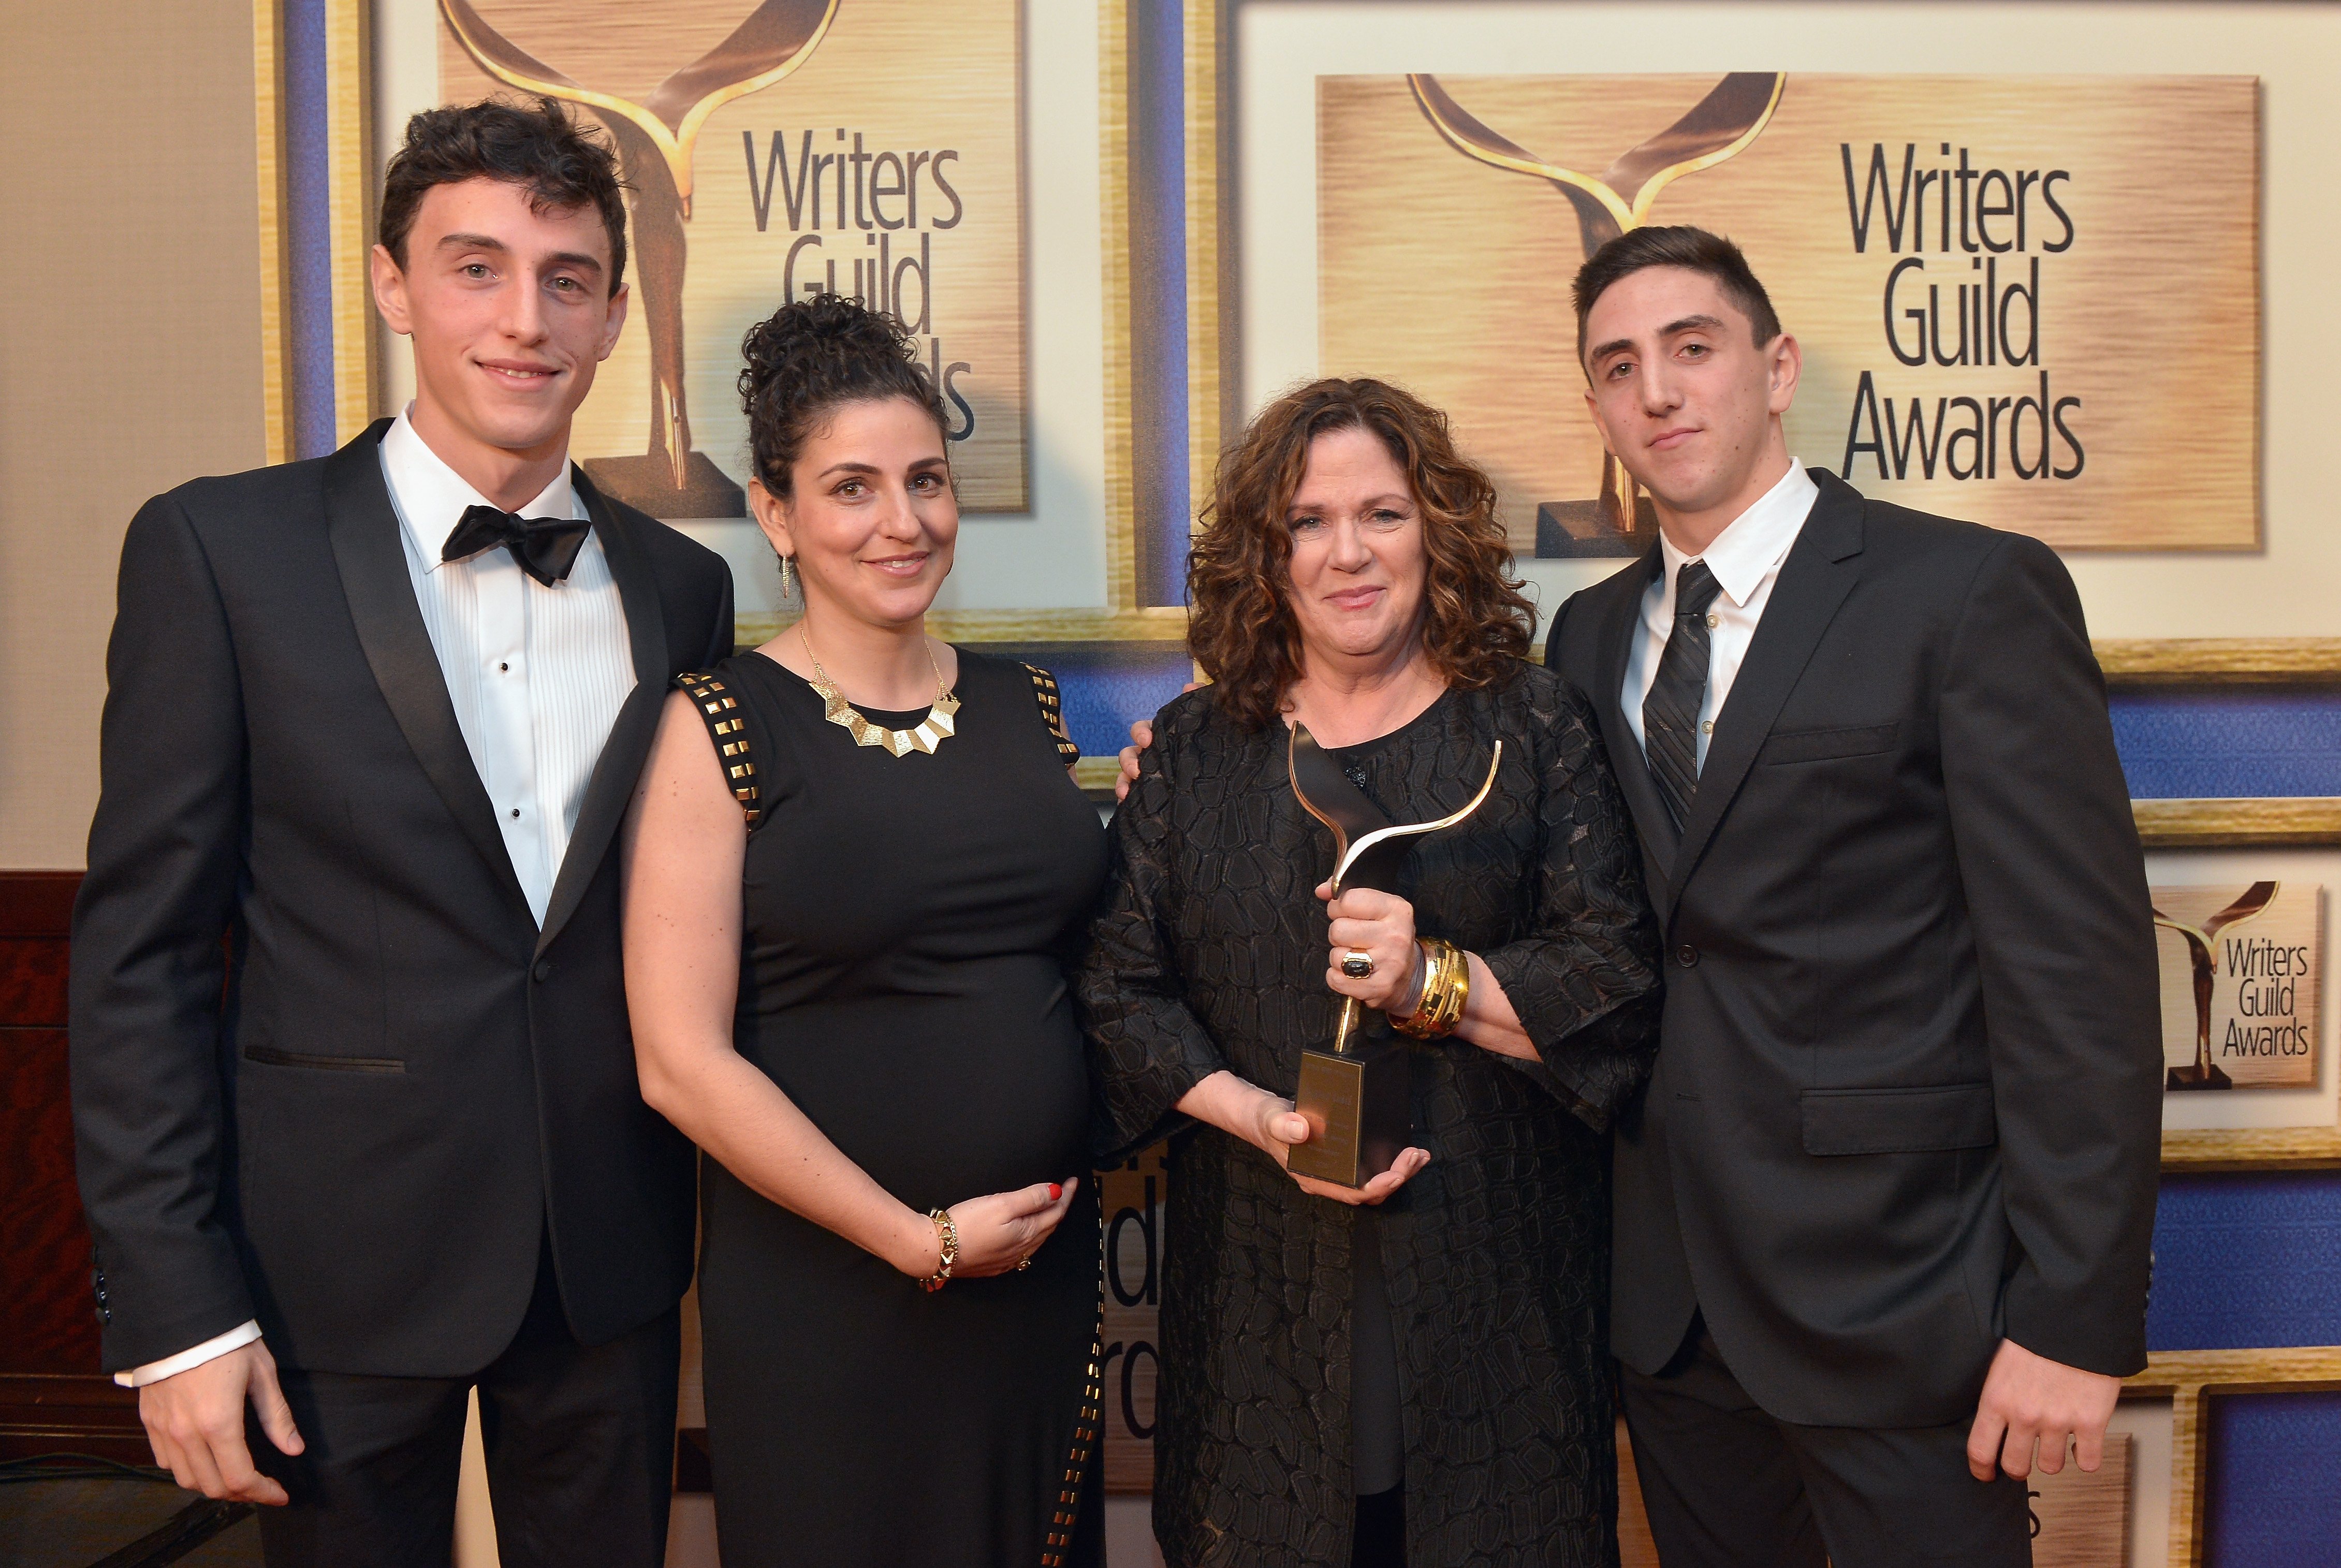 (L-R) Daniel Ramis, Violet Ramis, Erica Mann Ramis, and Julian Ramis pose with the Screen Laurel Award during the 2015 Writers Guild Awards L.A. Ceremony at the Hyatt Regency Century Plaza on February 14, 2015, in Century City, California | Source: Getty Images